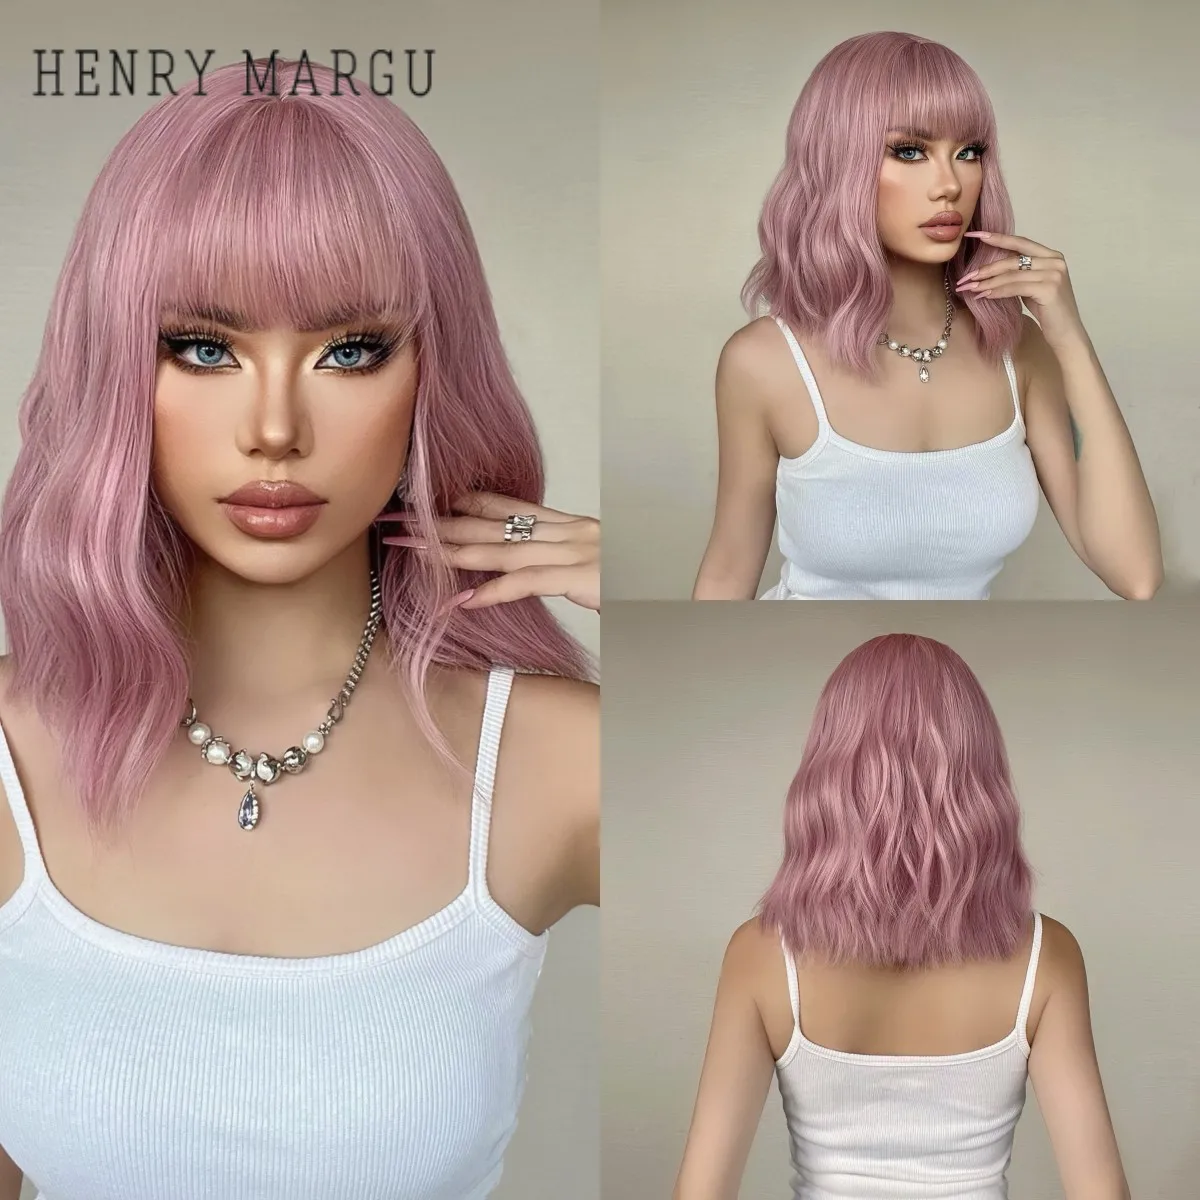 

HENRY MARGU Pink Synthetic Natural Wigs Short Wavy Bobo Hair Wigs for Women With Bangs Heat Resistant Fiber Daily Lolita Wigs